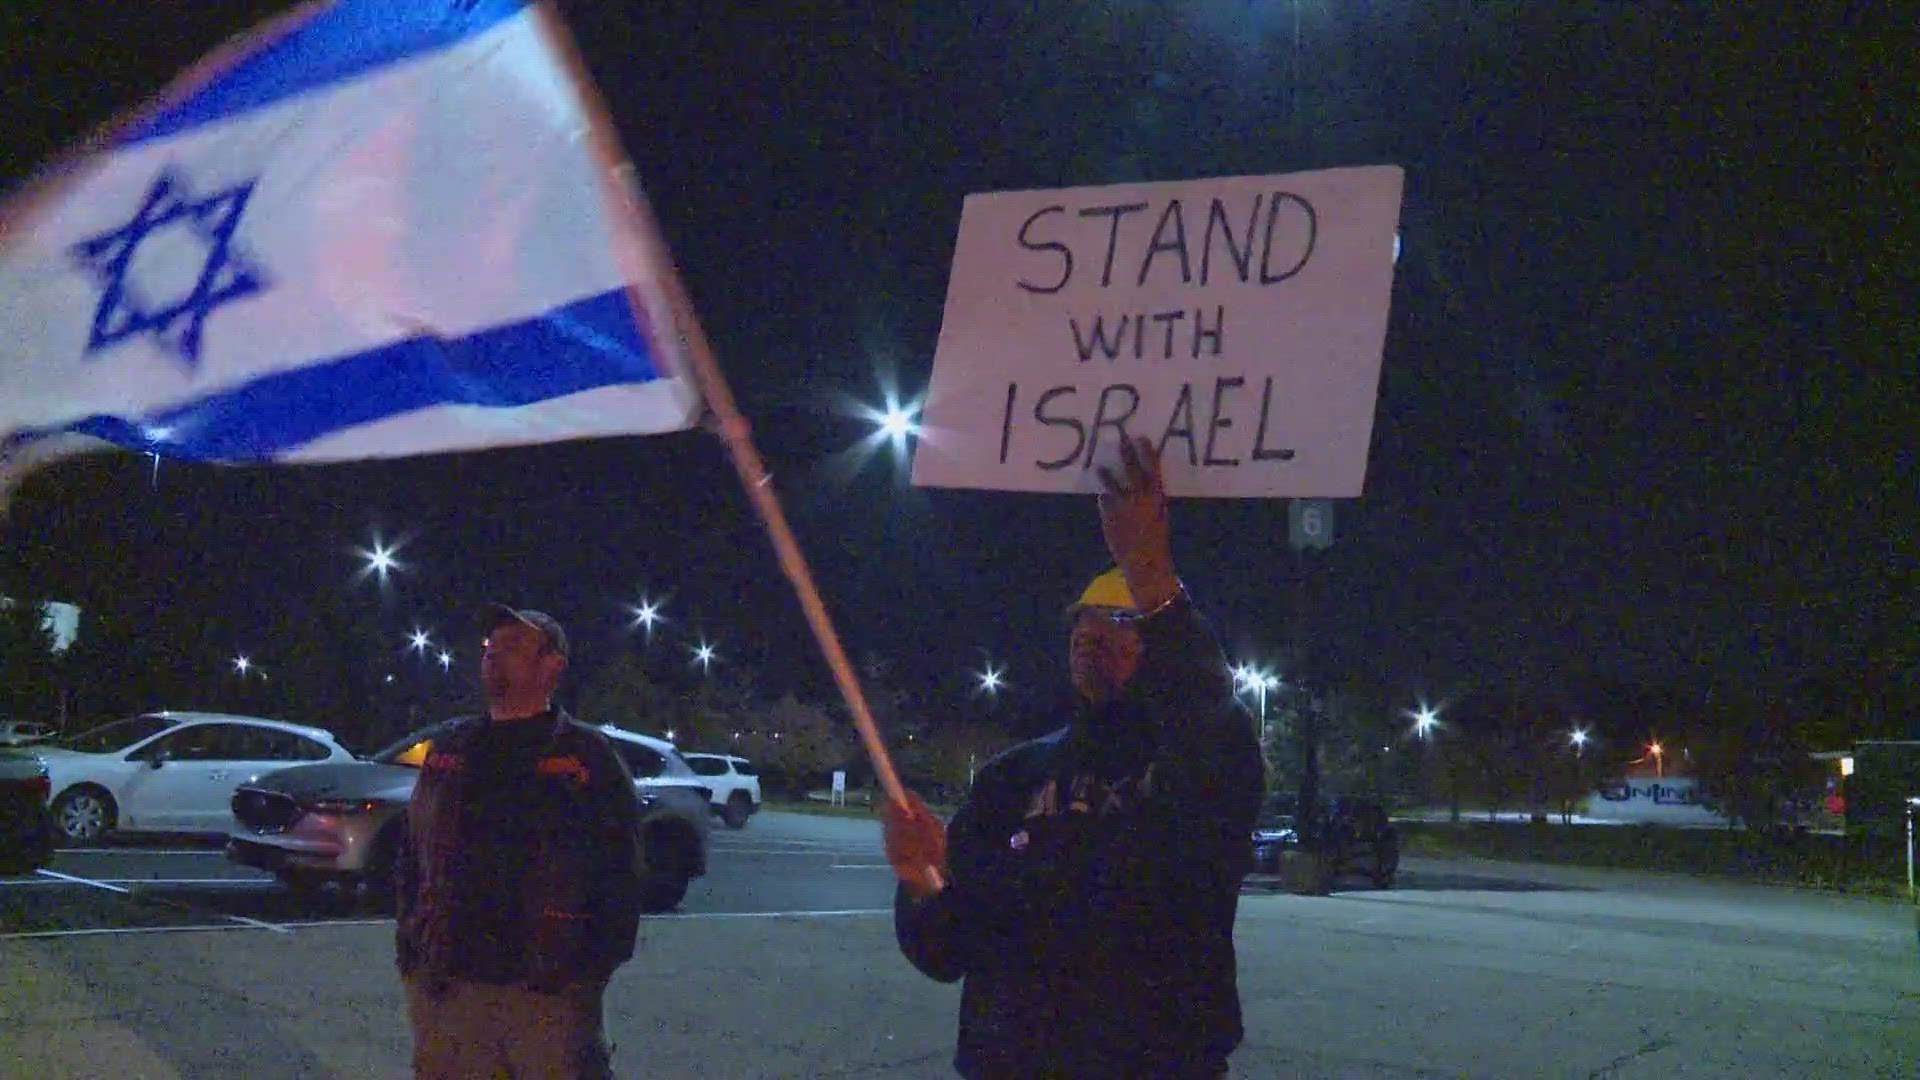 The March for Israel rally in DC will include a group of people from Northeast Ohio.